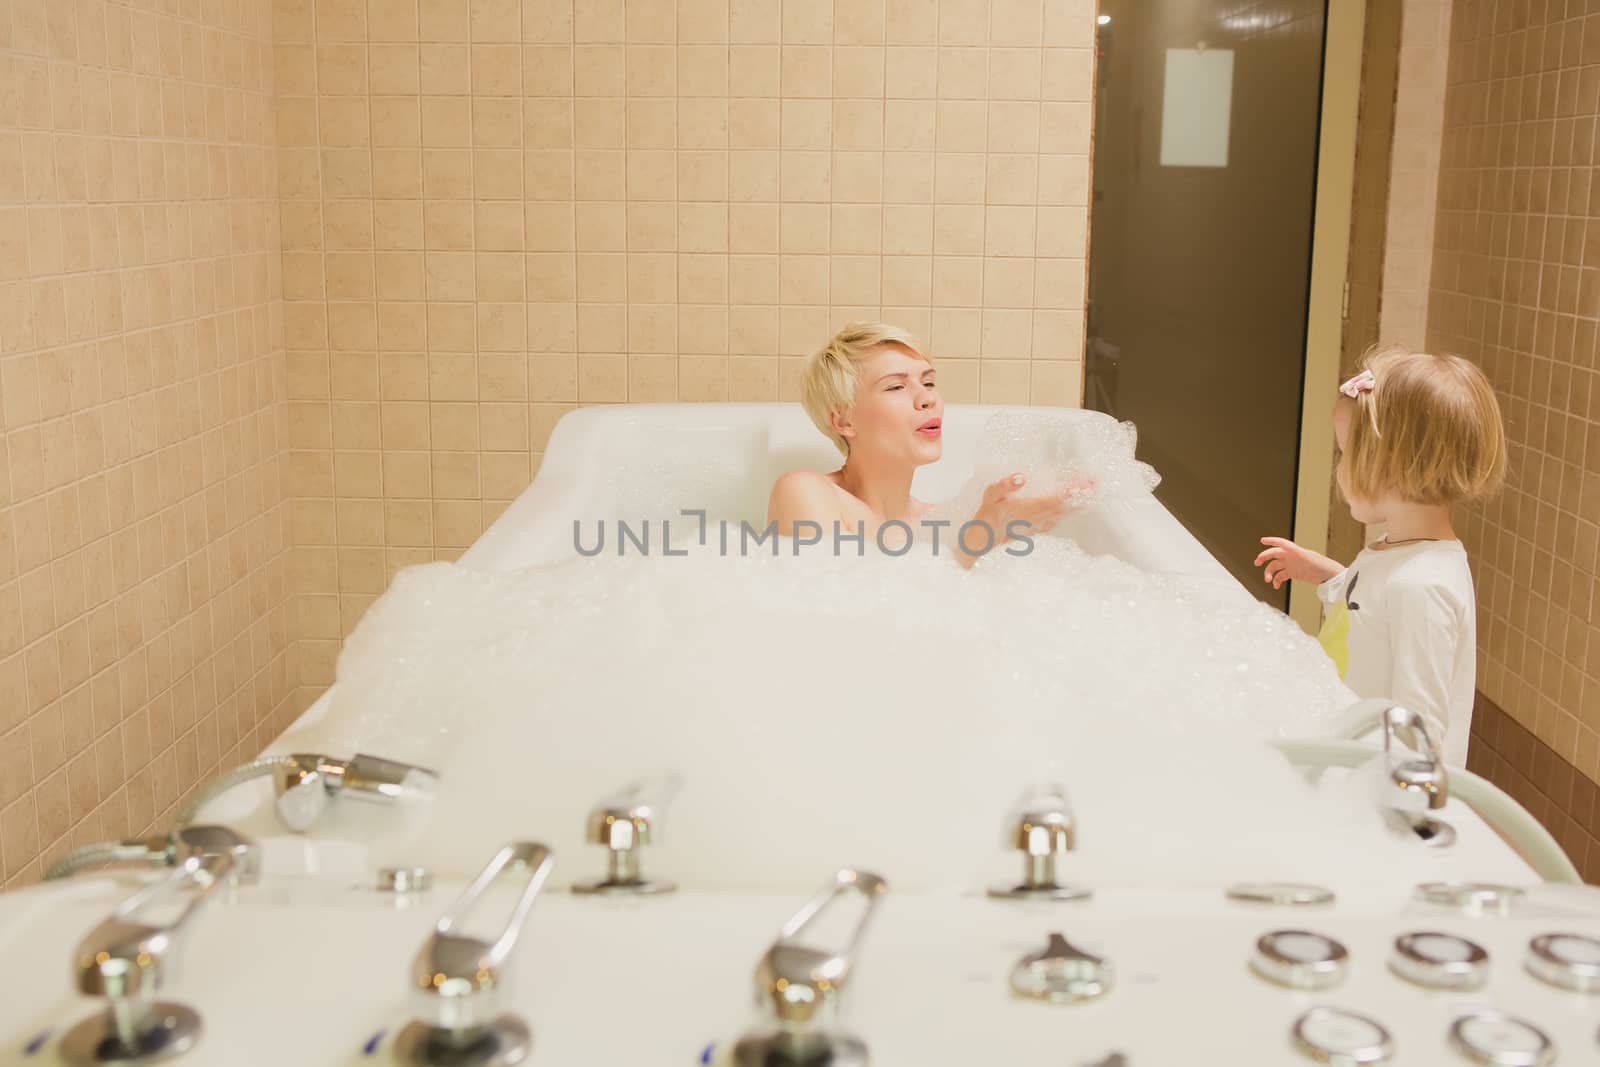 A woman and a hydro massage. She receives medical treatments for relaxation.